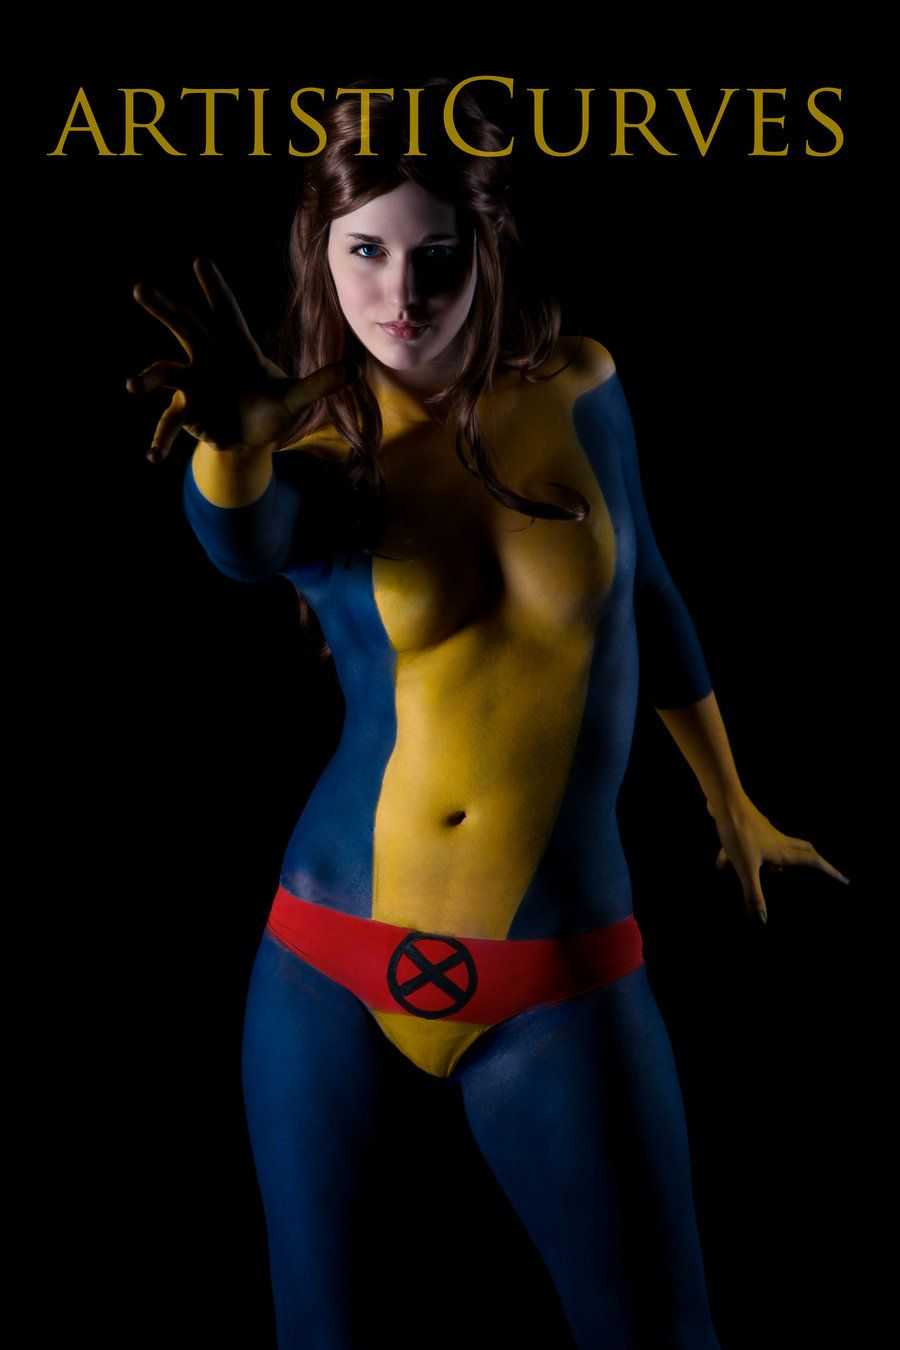 51 Hot Pictures Of Kitty Pryde That Will Make Your Heart Pound For Her 41